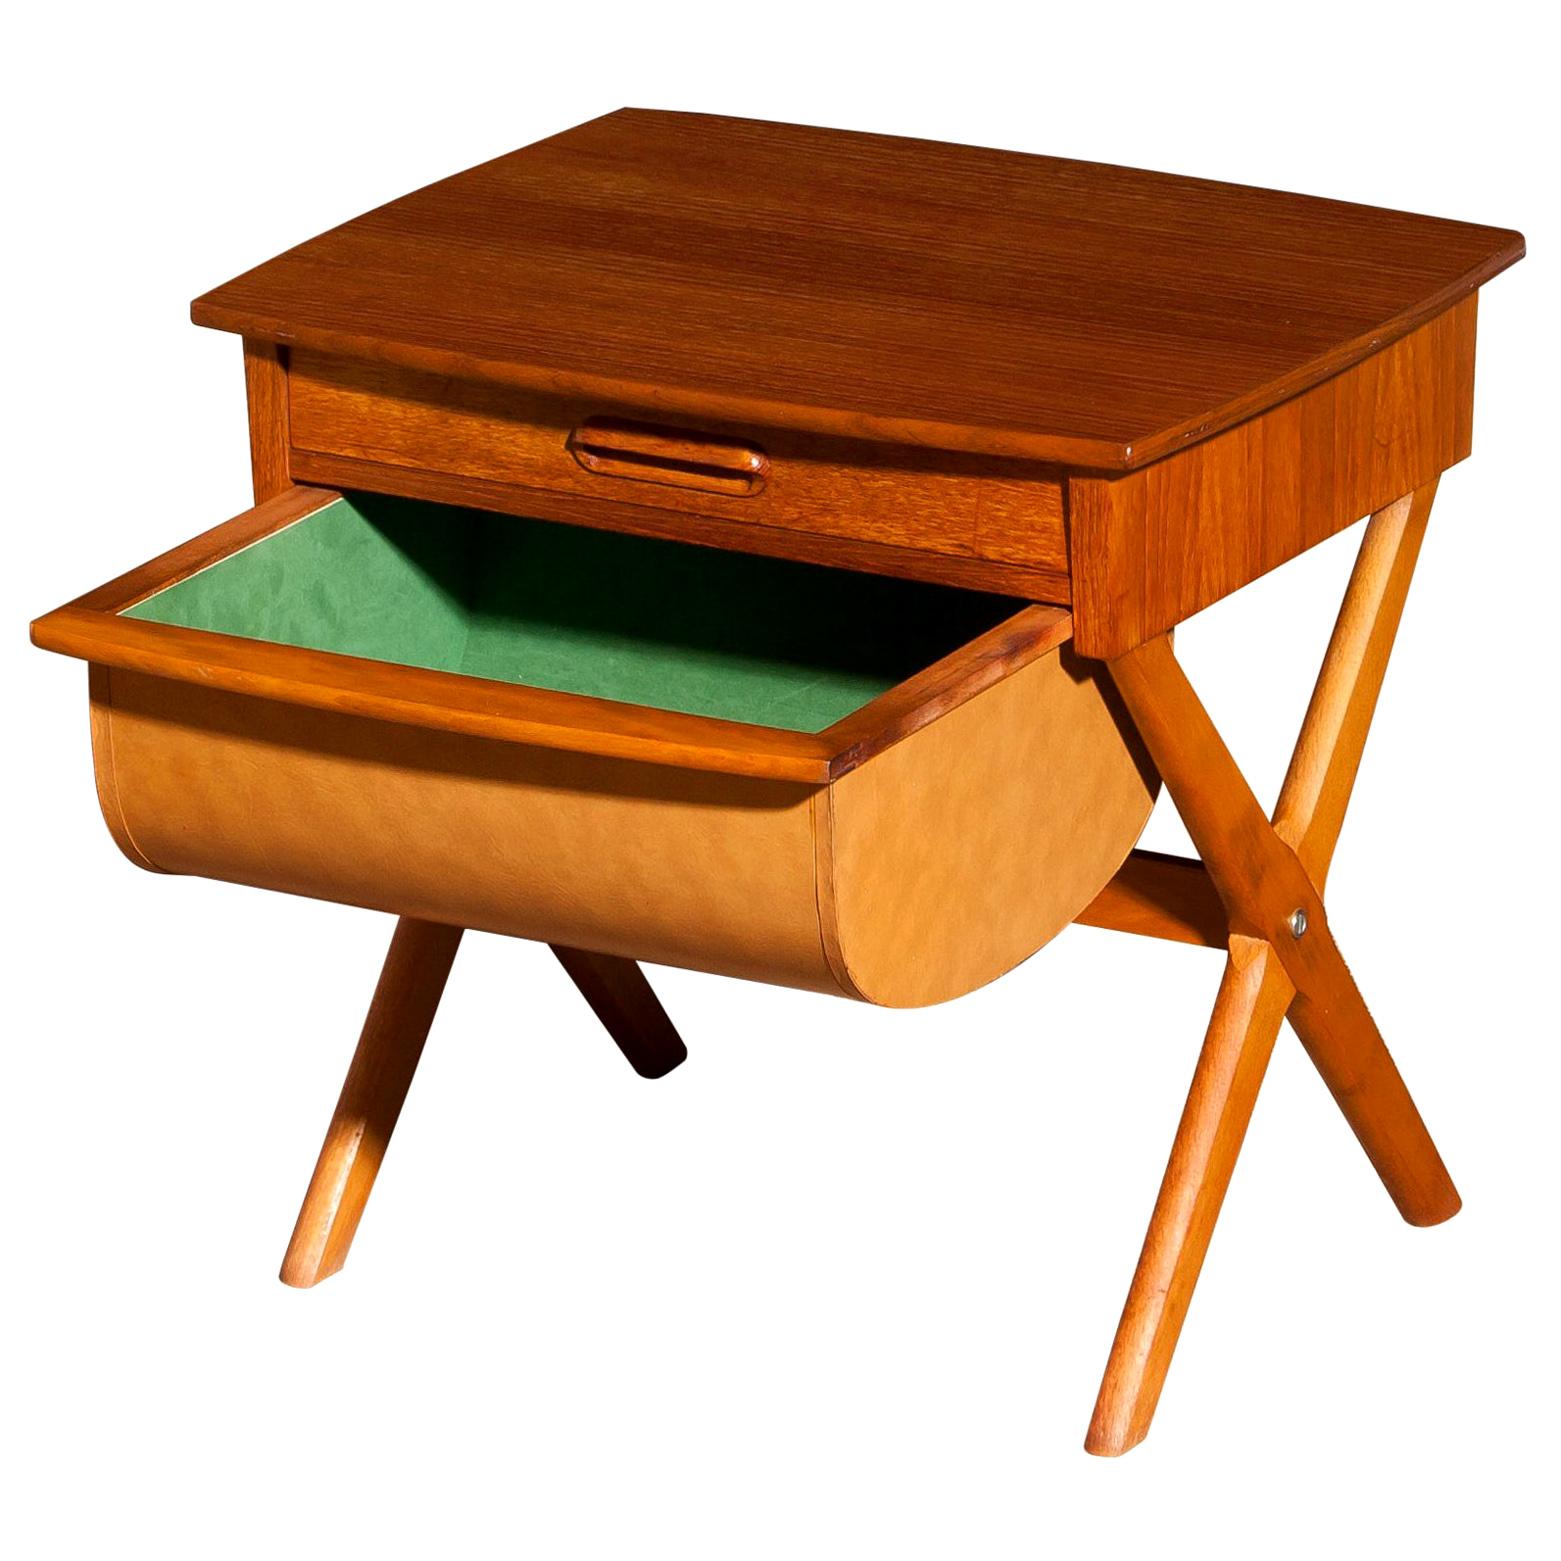 Very nice sewing table made in Sweden.
This table is made of teak and has one normal drawer and one deep drawer.
It is in a beautiful condition.
Period 1960s.
Dimensions: H 52 cm x W 52 cm x D 45 cm.